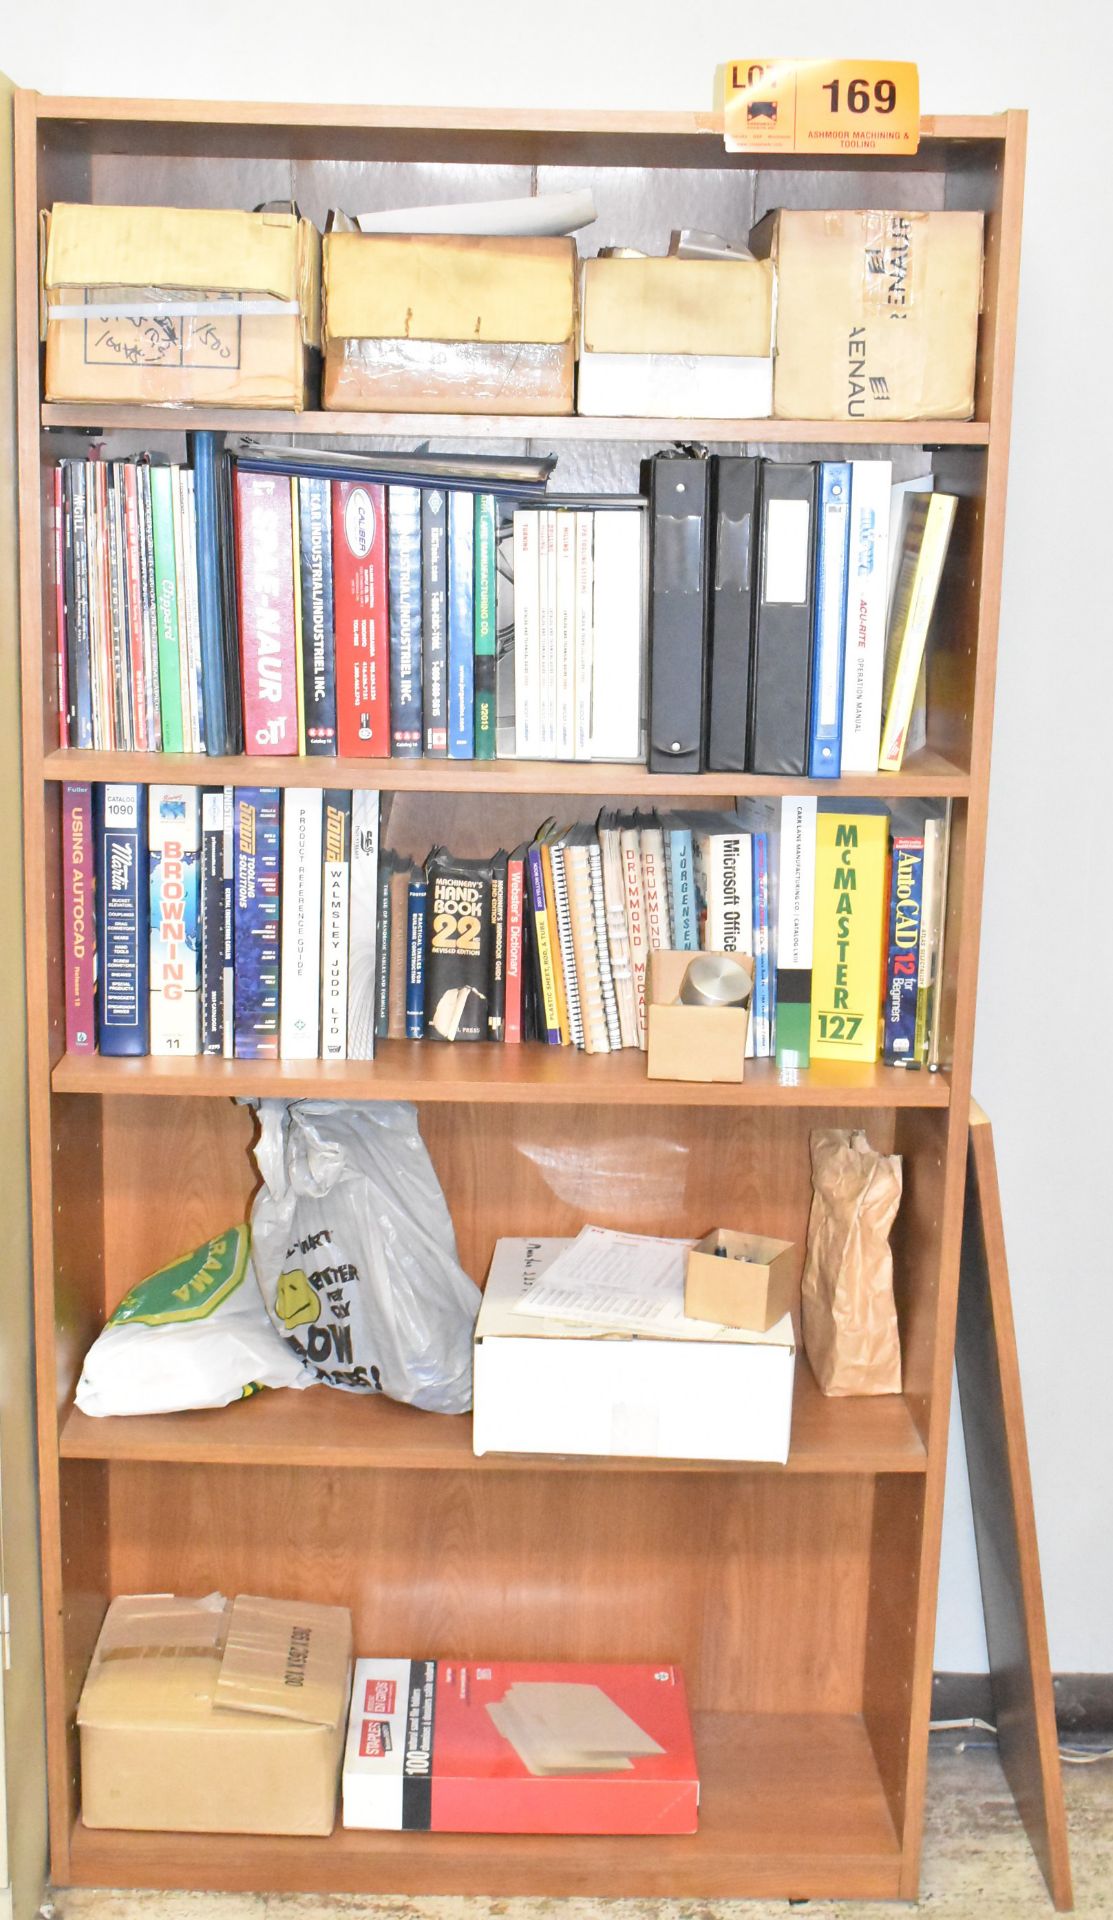 LOT/ REMAINING CONTENTS OF OFFICE - FURNITURE ONLY - INCLUDING DESKS, CHAIRS, BOOKSHELVES, FOLDING